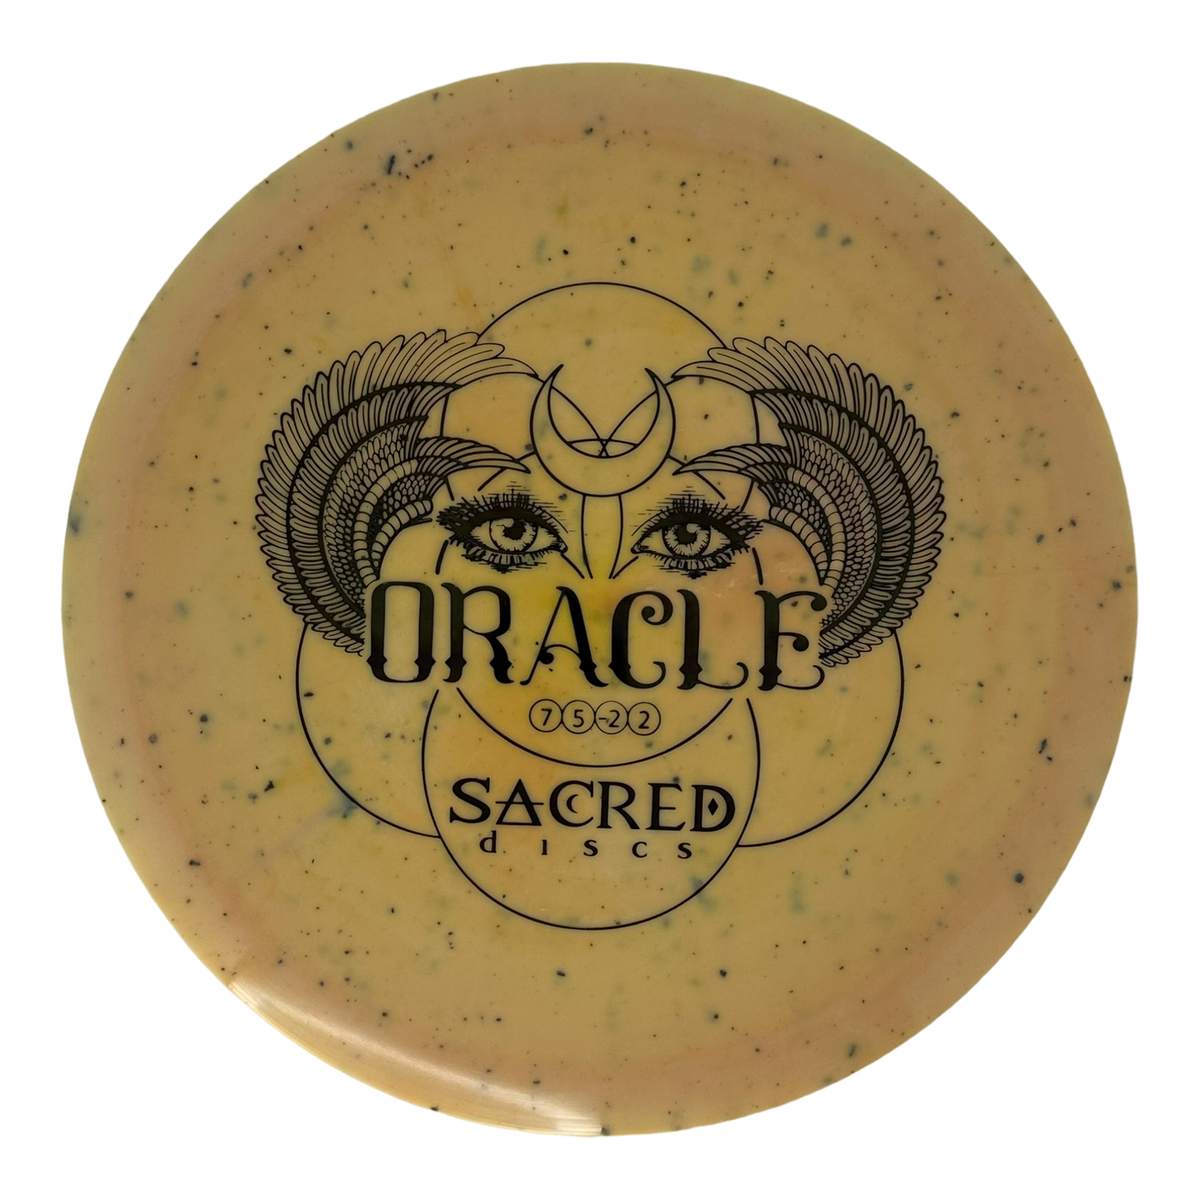 Sacred Discs Alchemy Blend Oracle - Artist Edition